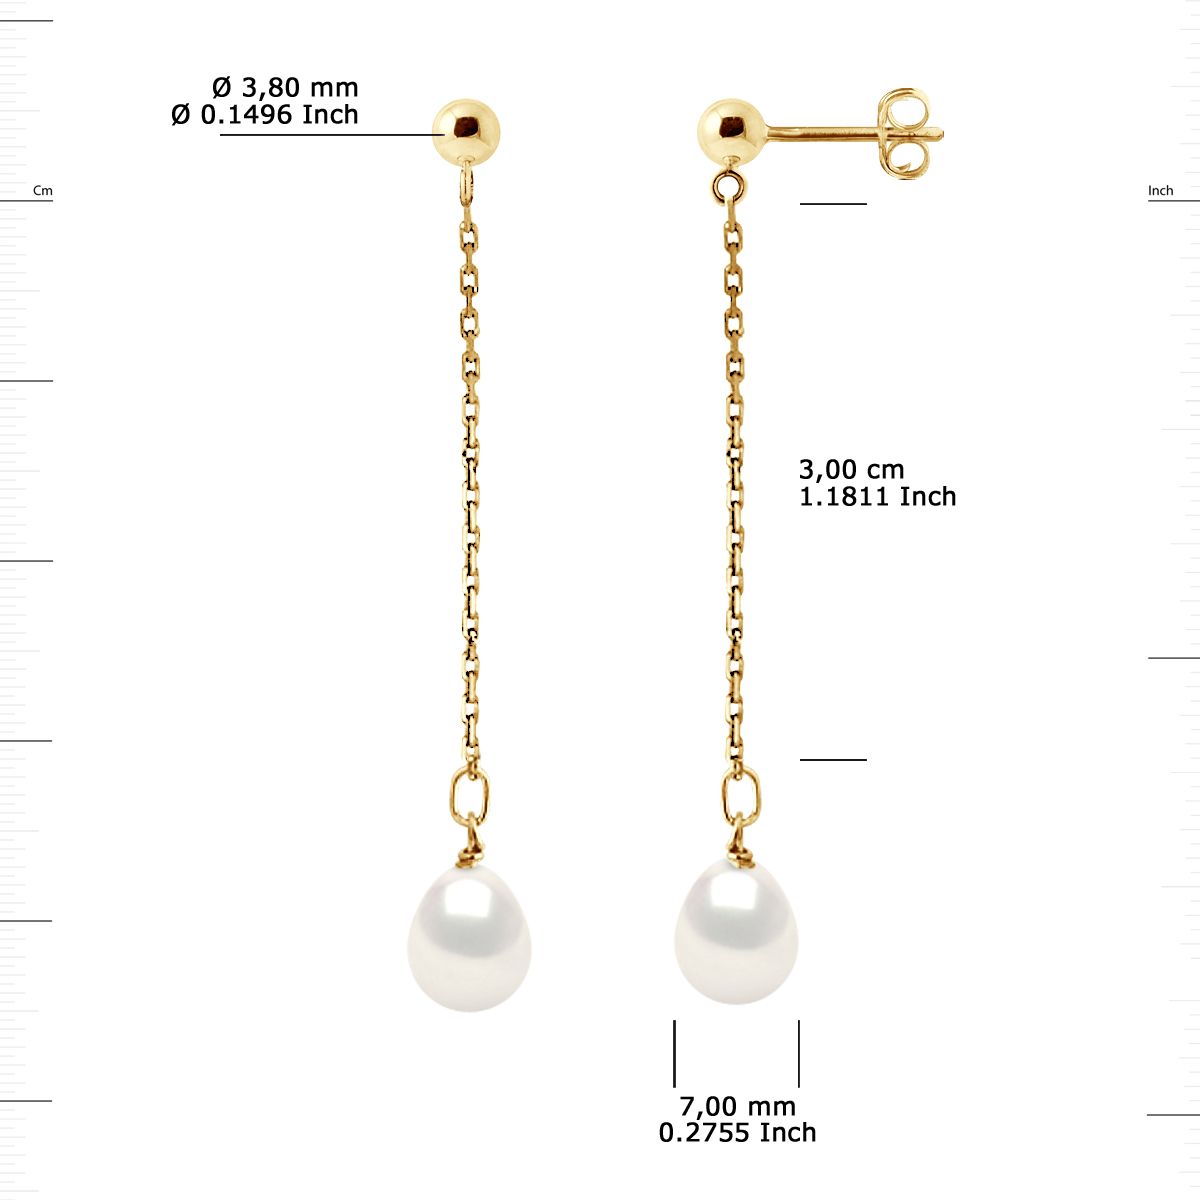 Earrings of true Cultured Freshwater Pearls Pear Shape 7-8 mm - 0,31 in - Natural White Color Push System and chain Gold - Our jewellery is made in France and will be delivered in a gift box accompanied by a Certificate of Authenticity and International Warranty